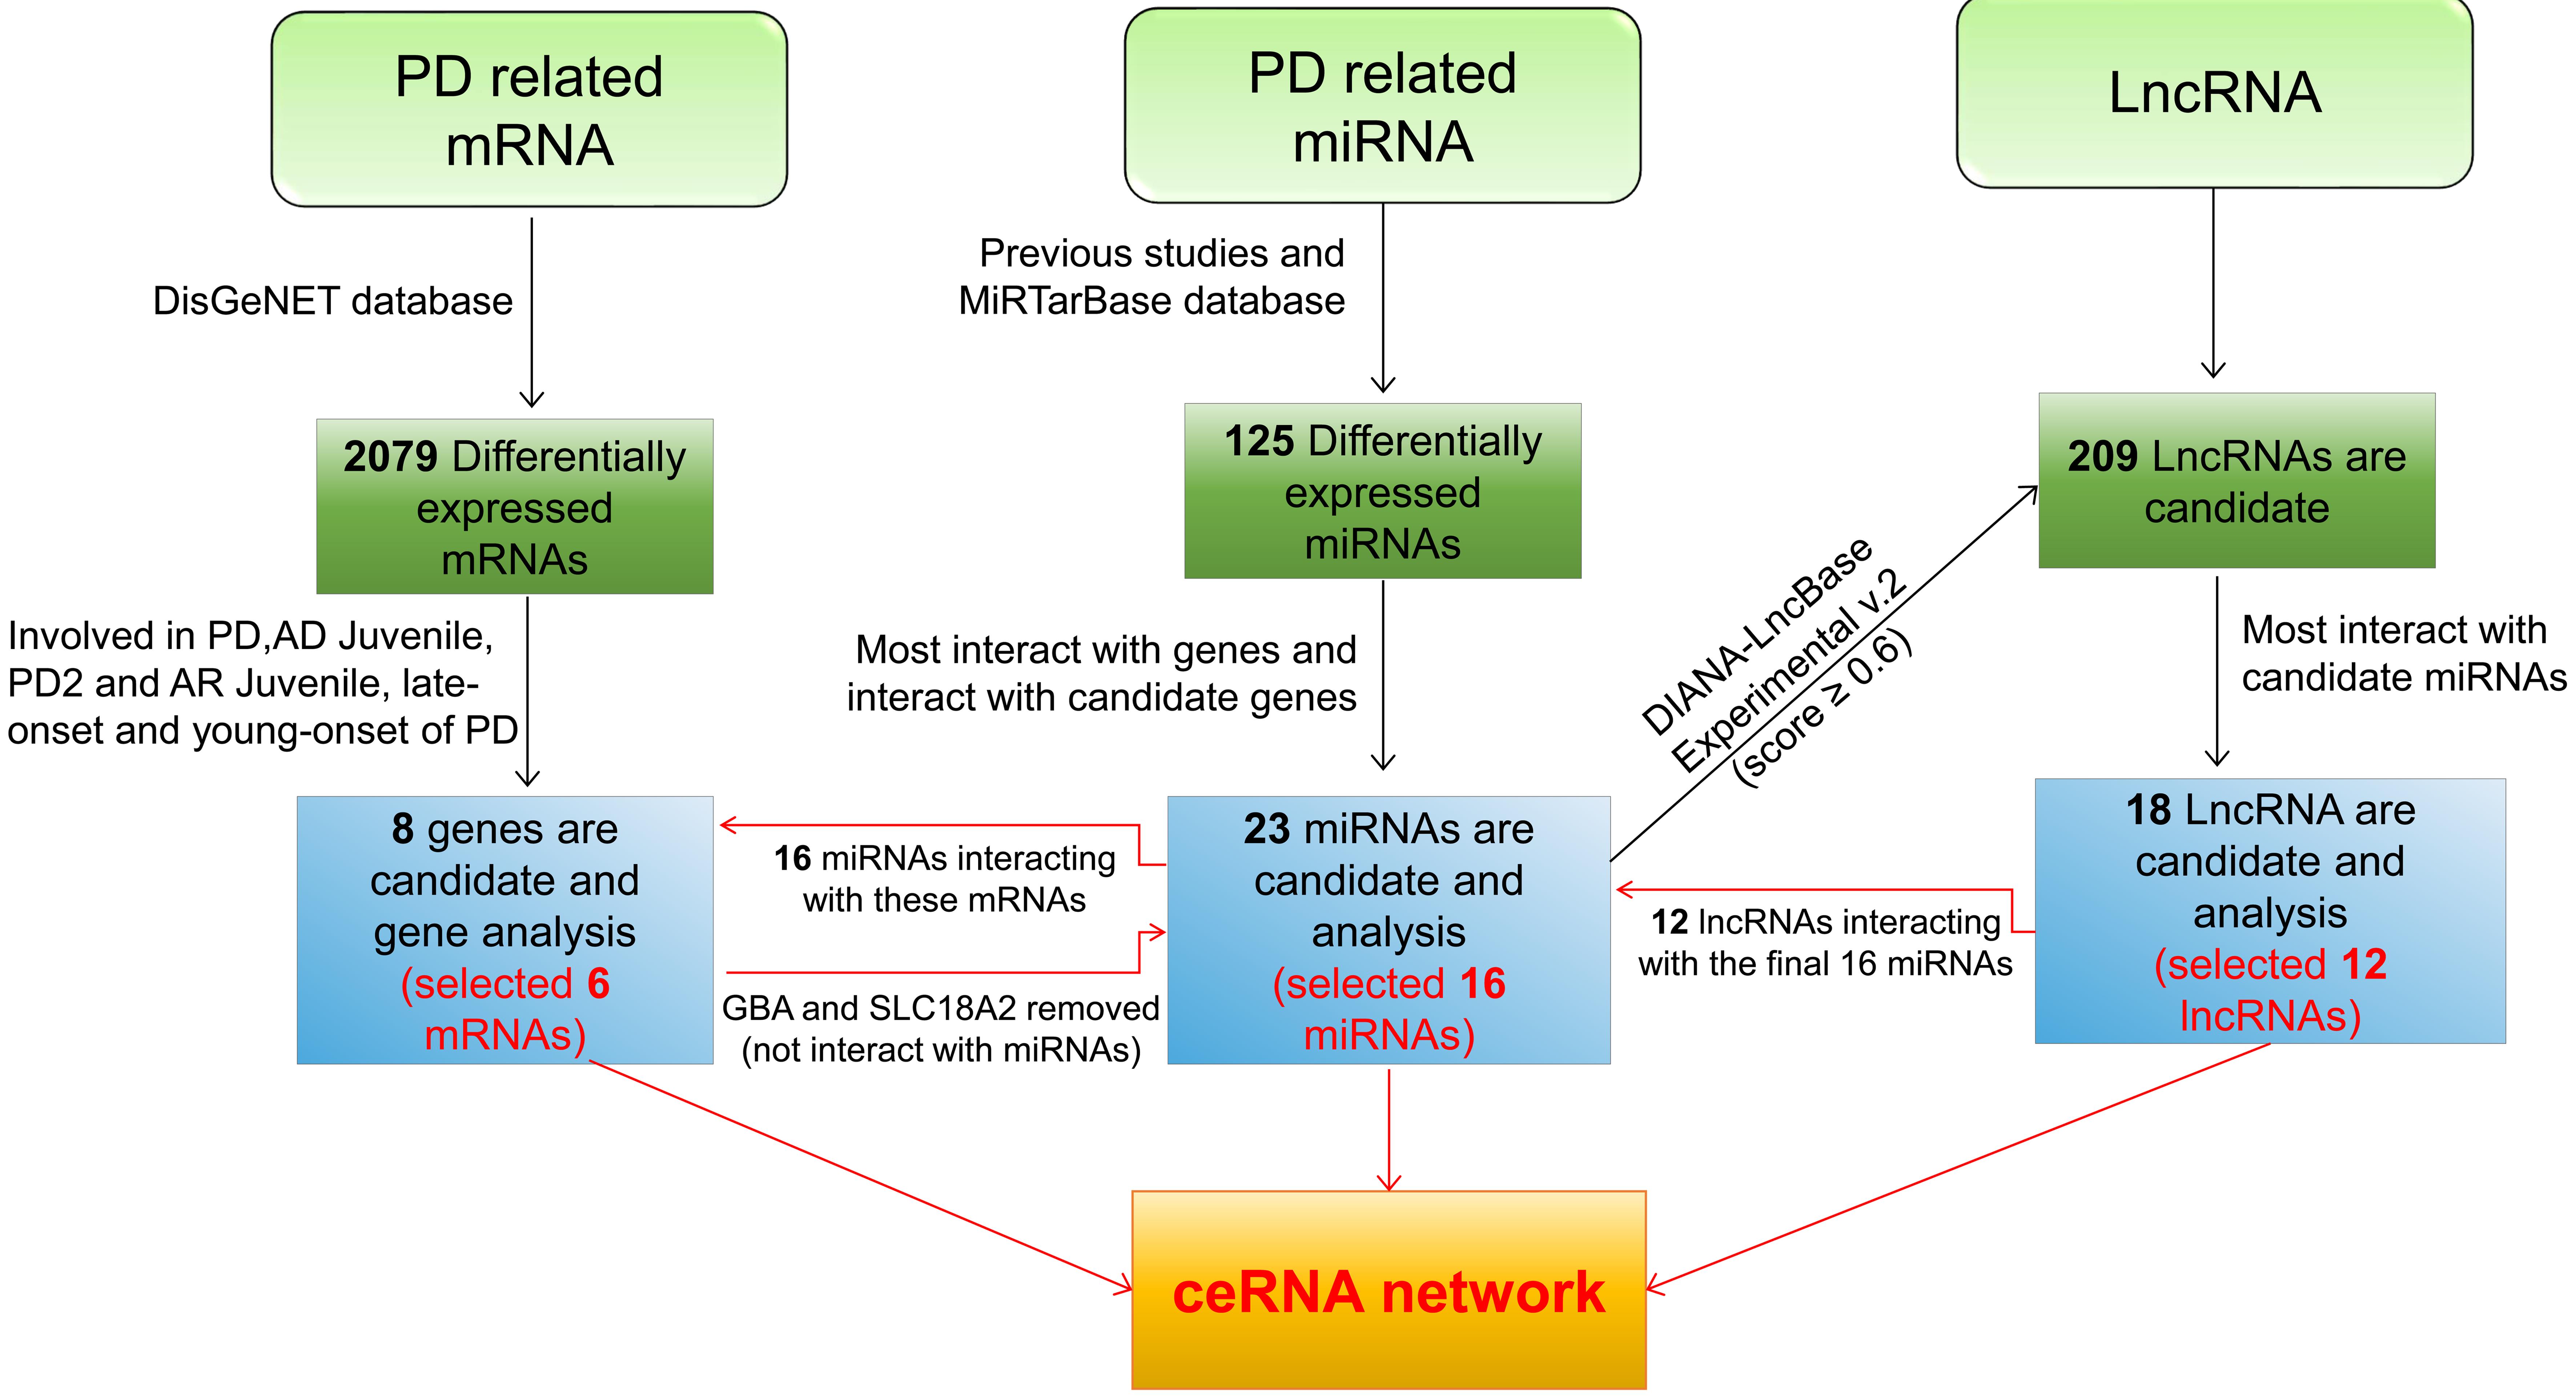 The workflow of the methods and the results and network construction in the study.